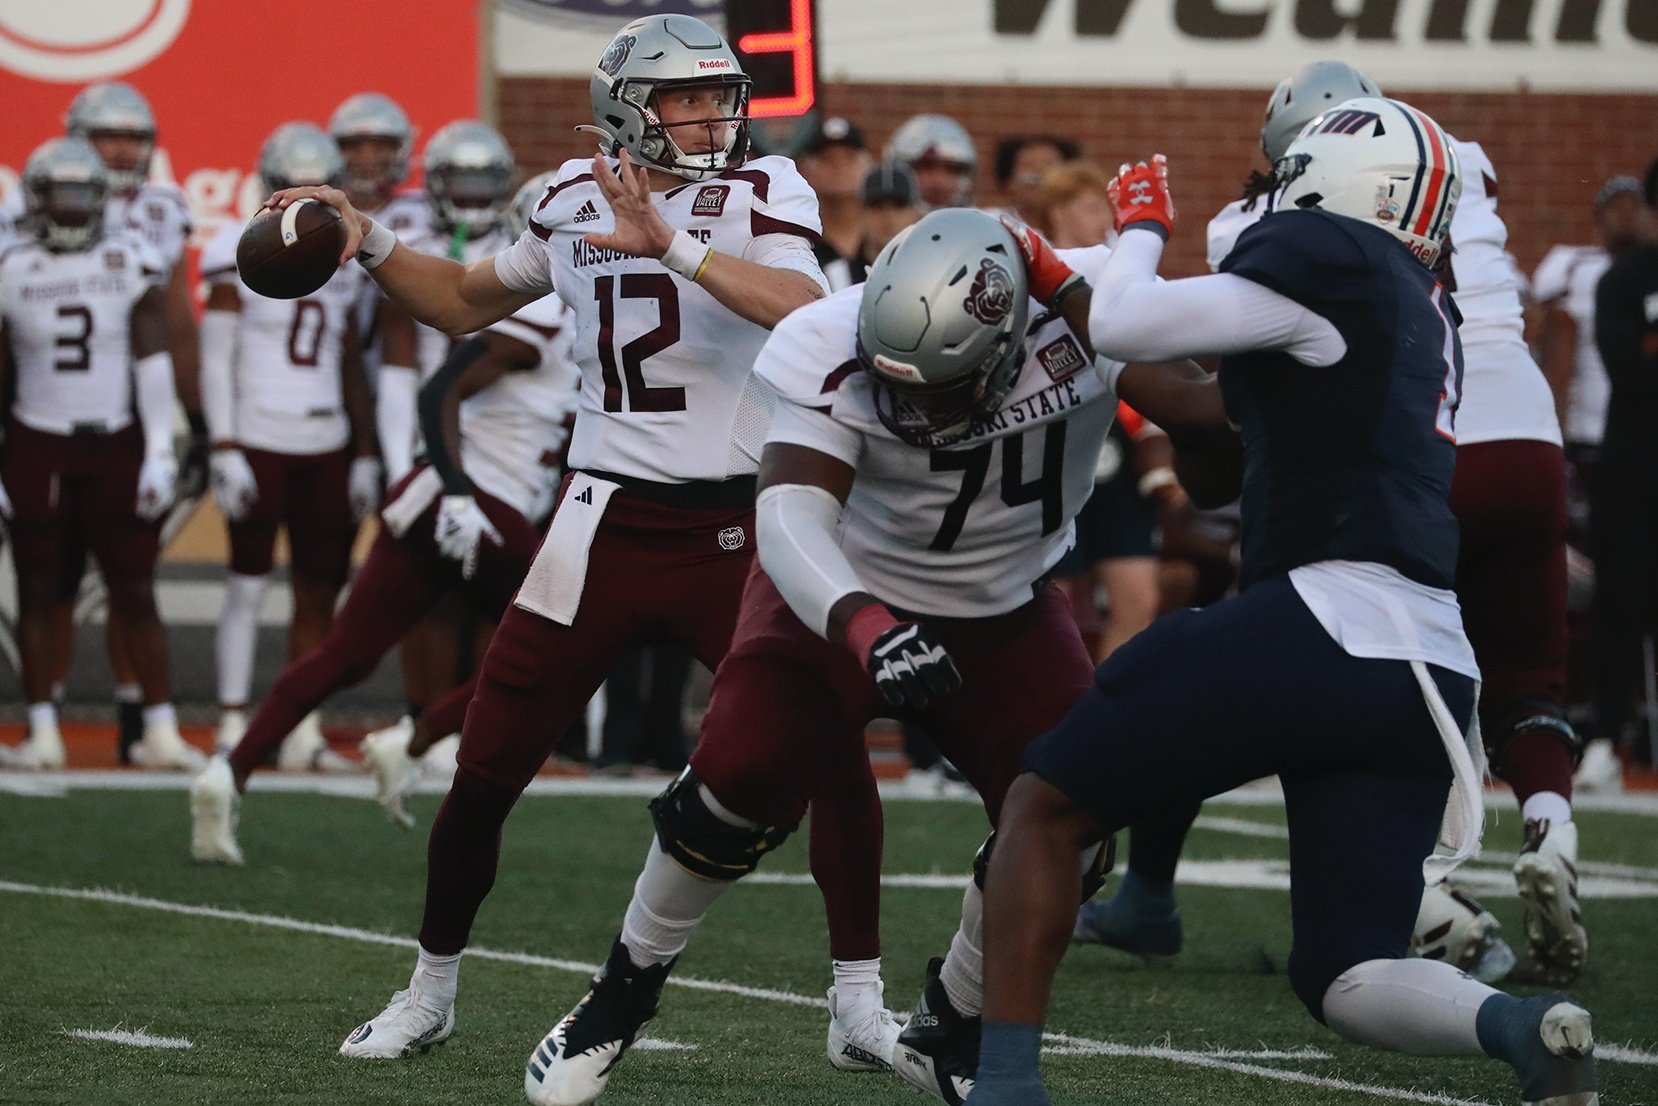 Jacob Clark, wearing a Missouri State football uniform, passes the ball during a game